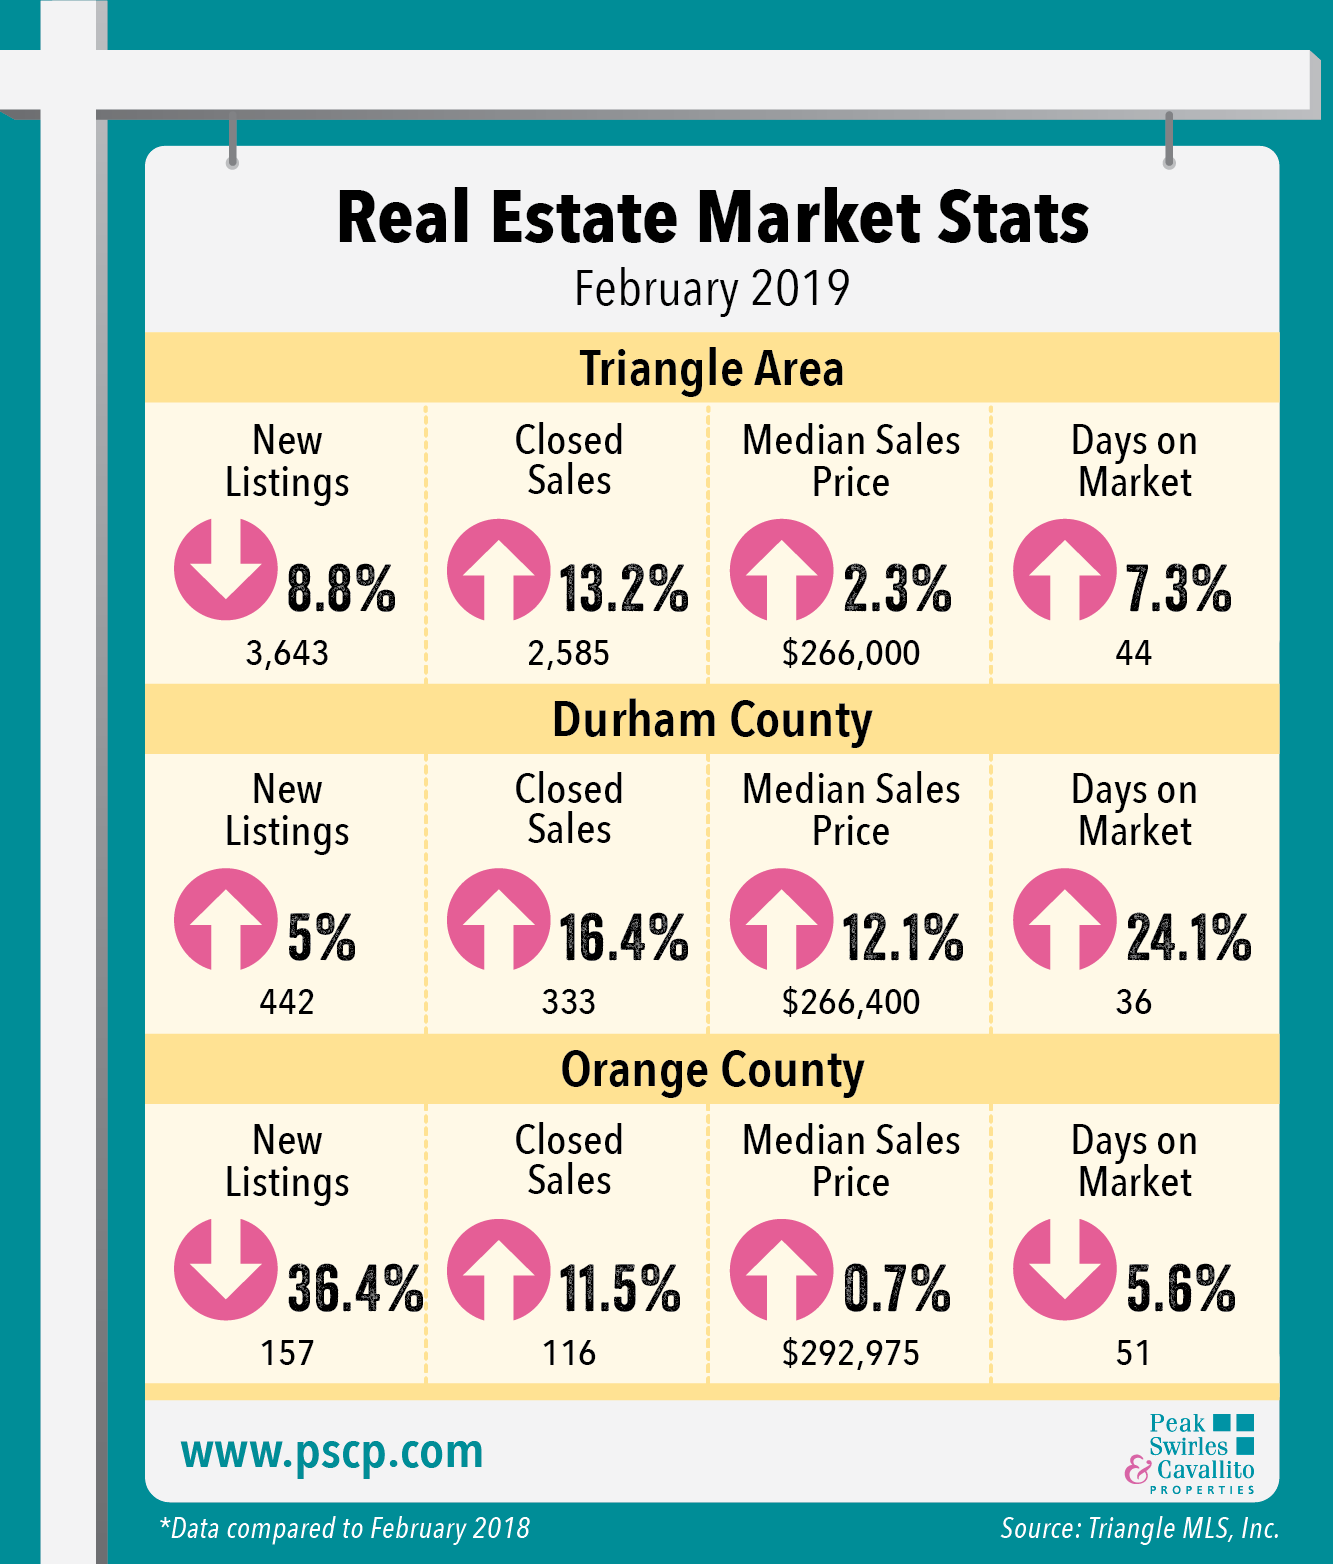 Real Estate Market Stats - February 2019